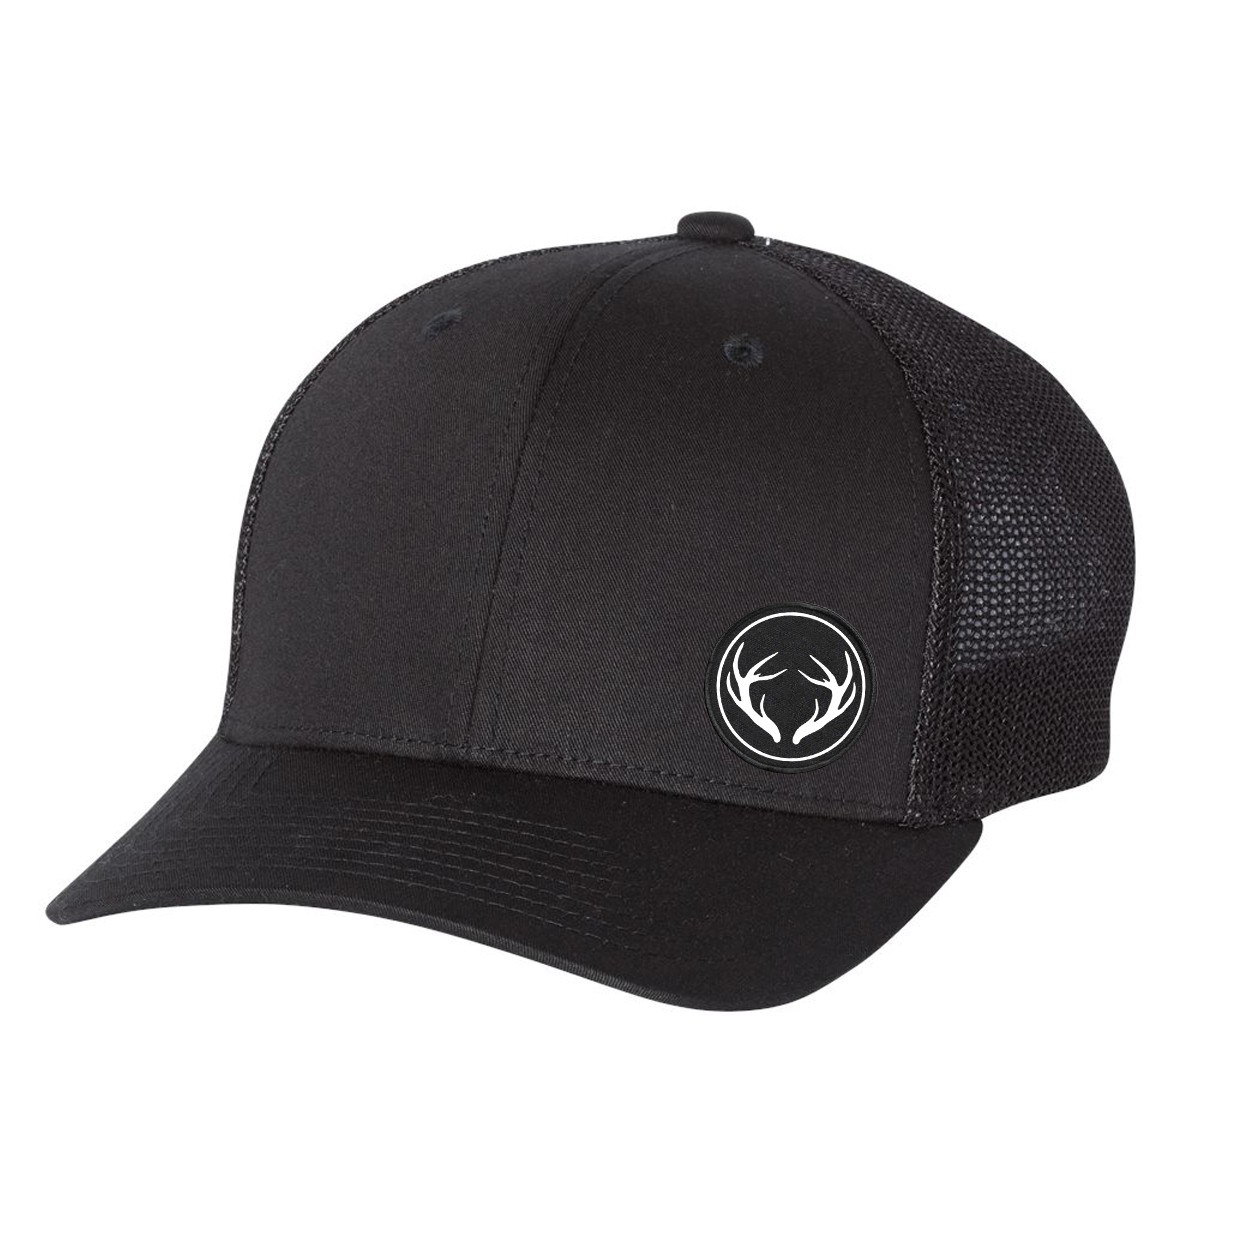 Hunt Rack Icon Logo Night Out Woven Circle Patch Snapback Trucker Hat Black (White Logo)